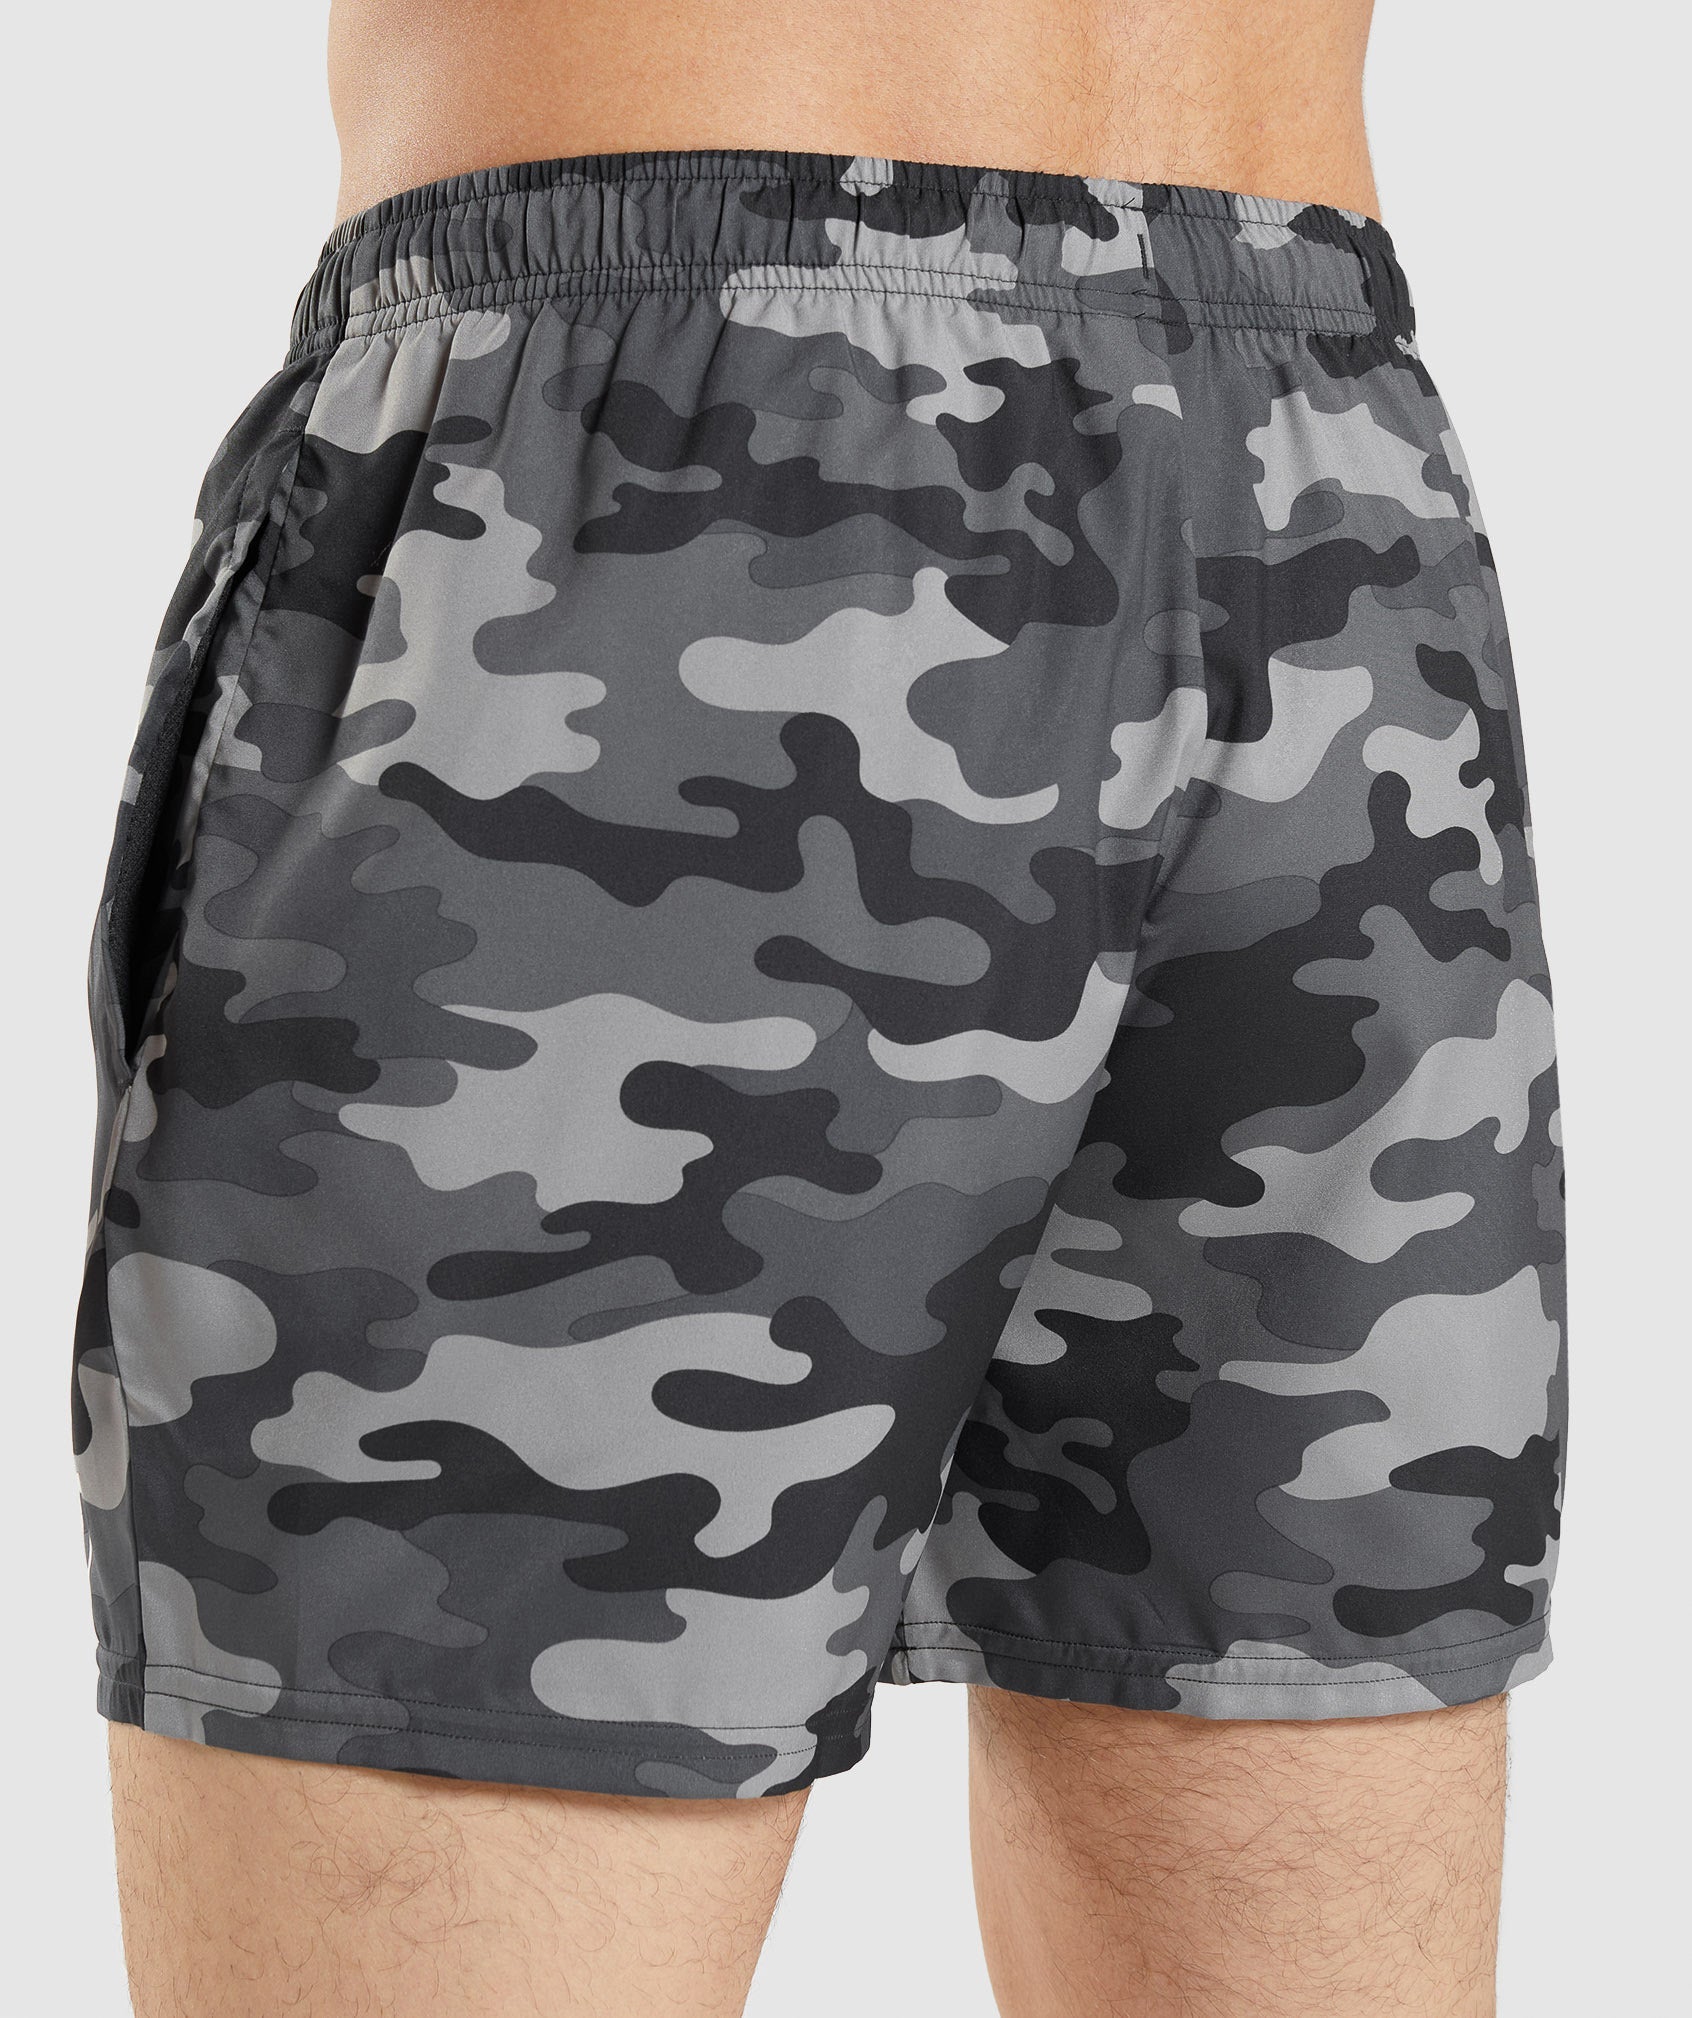 Arrival 5" Shorts in Grey Print - view 4